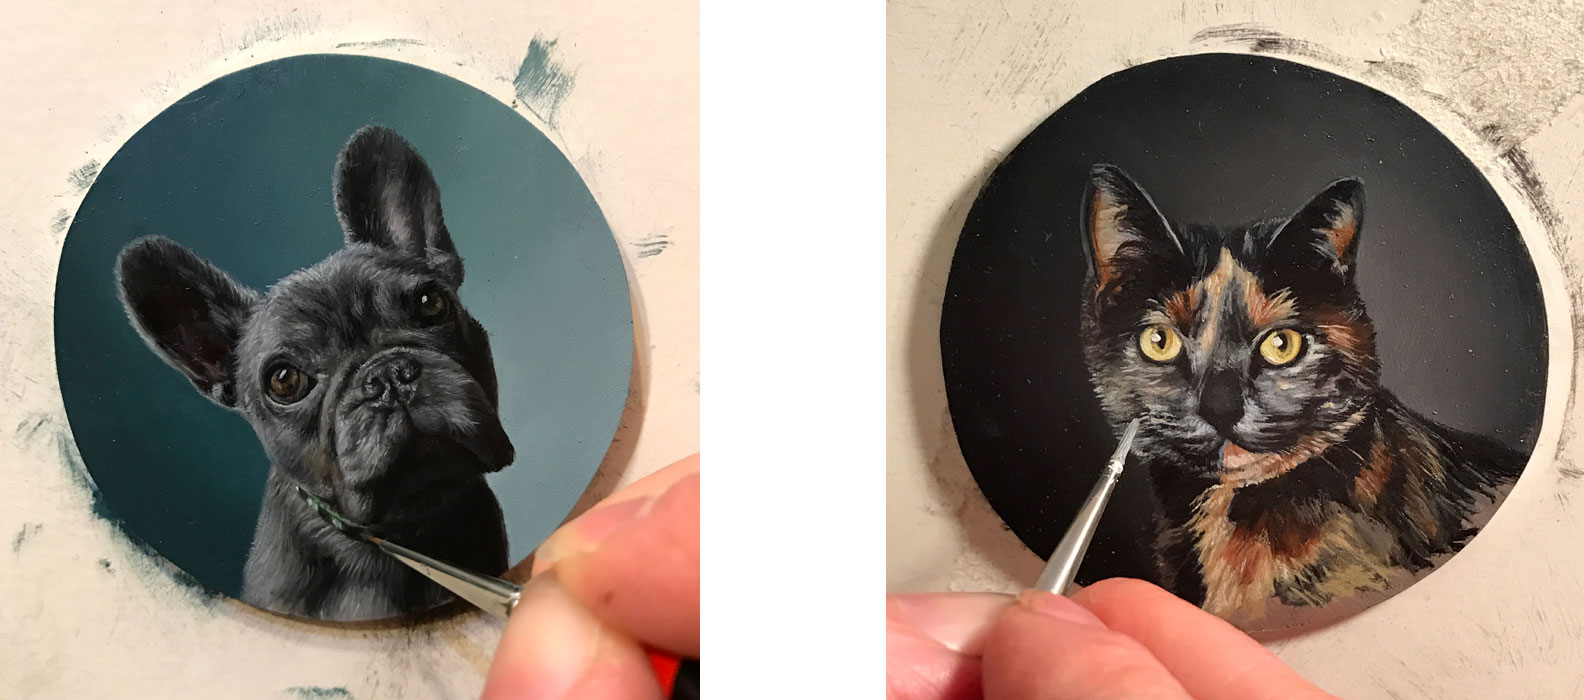 French bulldog and Cat miniature portrait paintings in progress by Rebecca Luncan